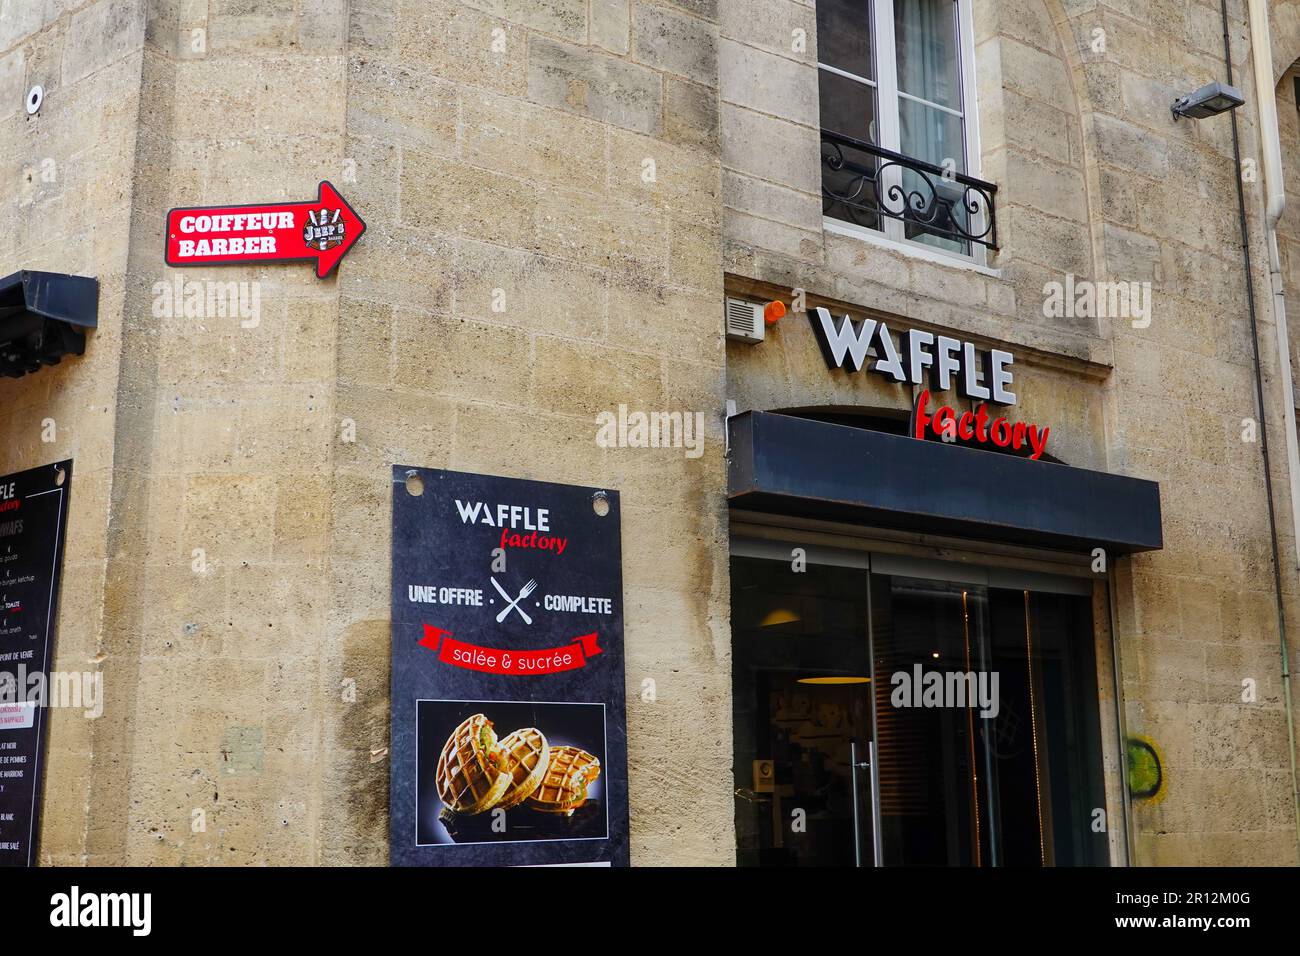 Waffle Factory, Belgian fast-food restaurant featuring sweet and savory waffles made daily on site with fresh ingredients, Sainte-Catherine Street. Stock Photo